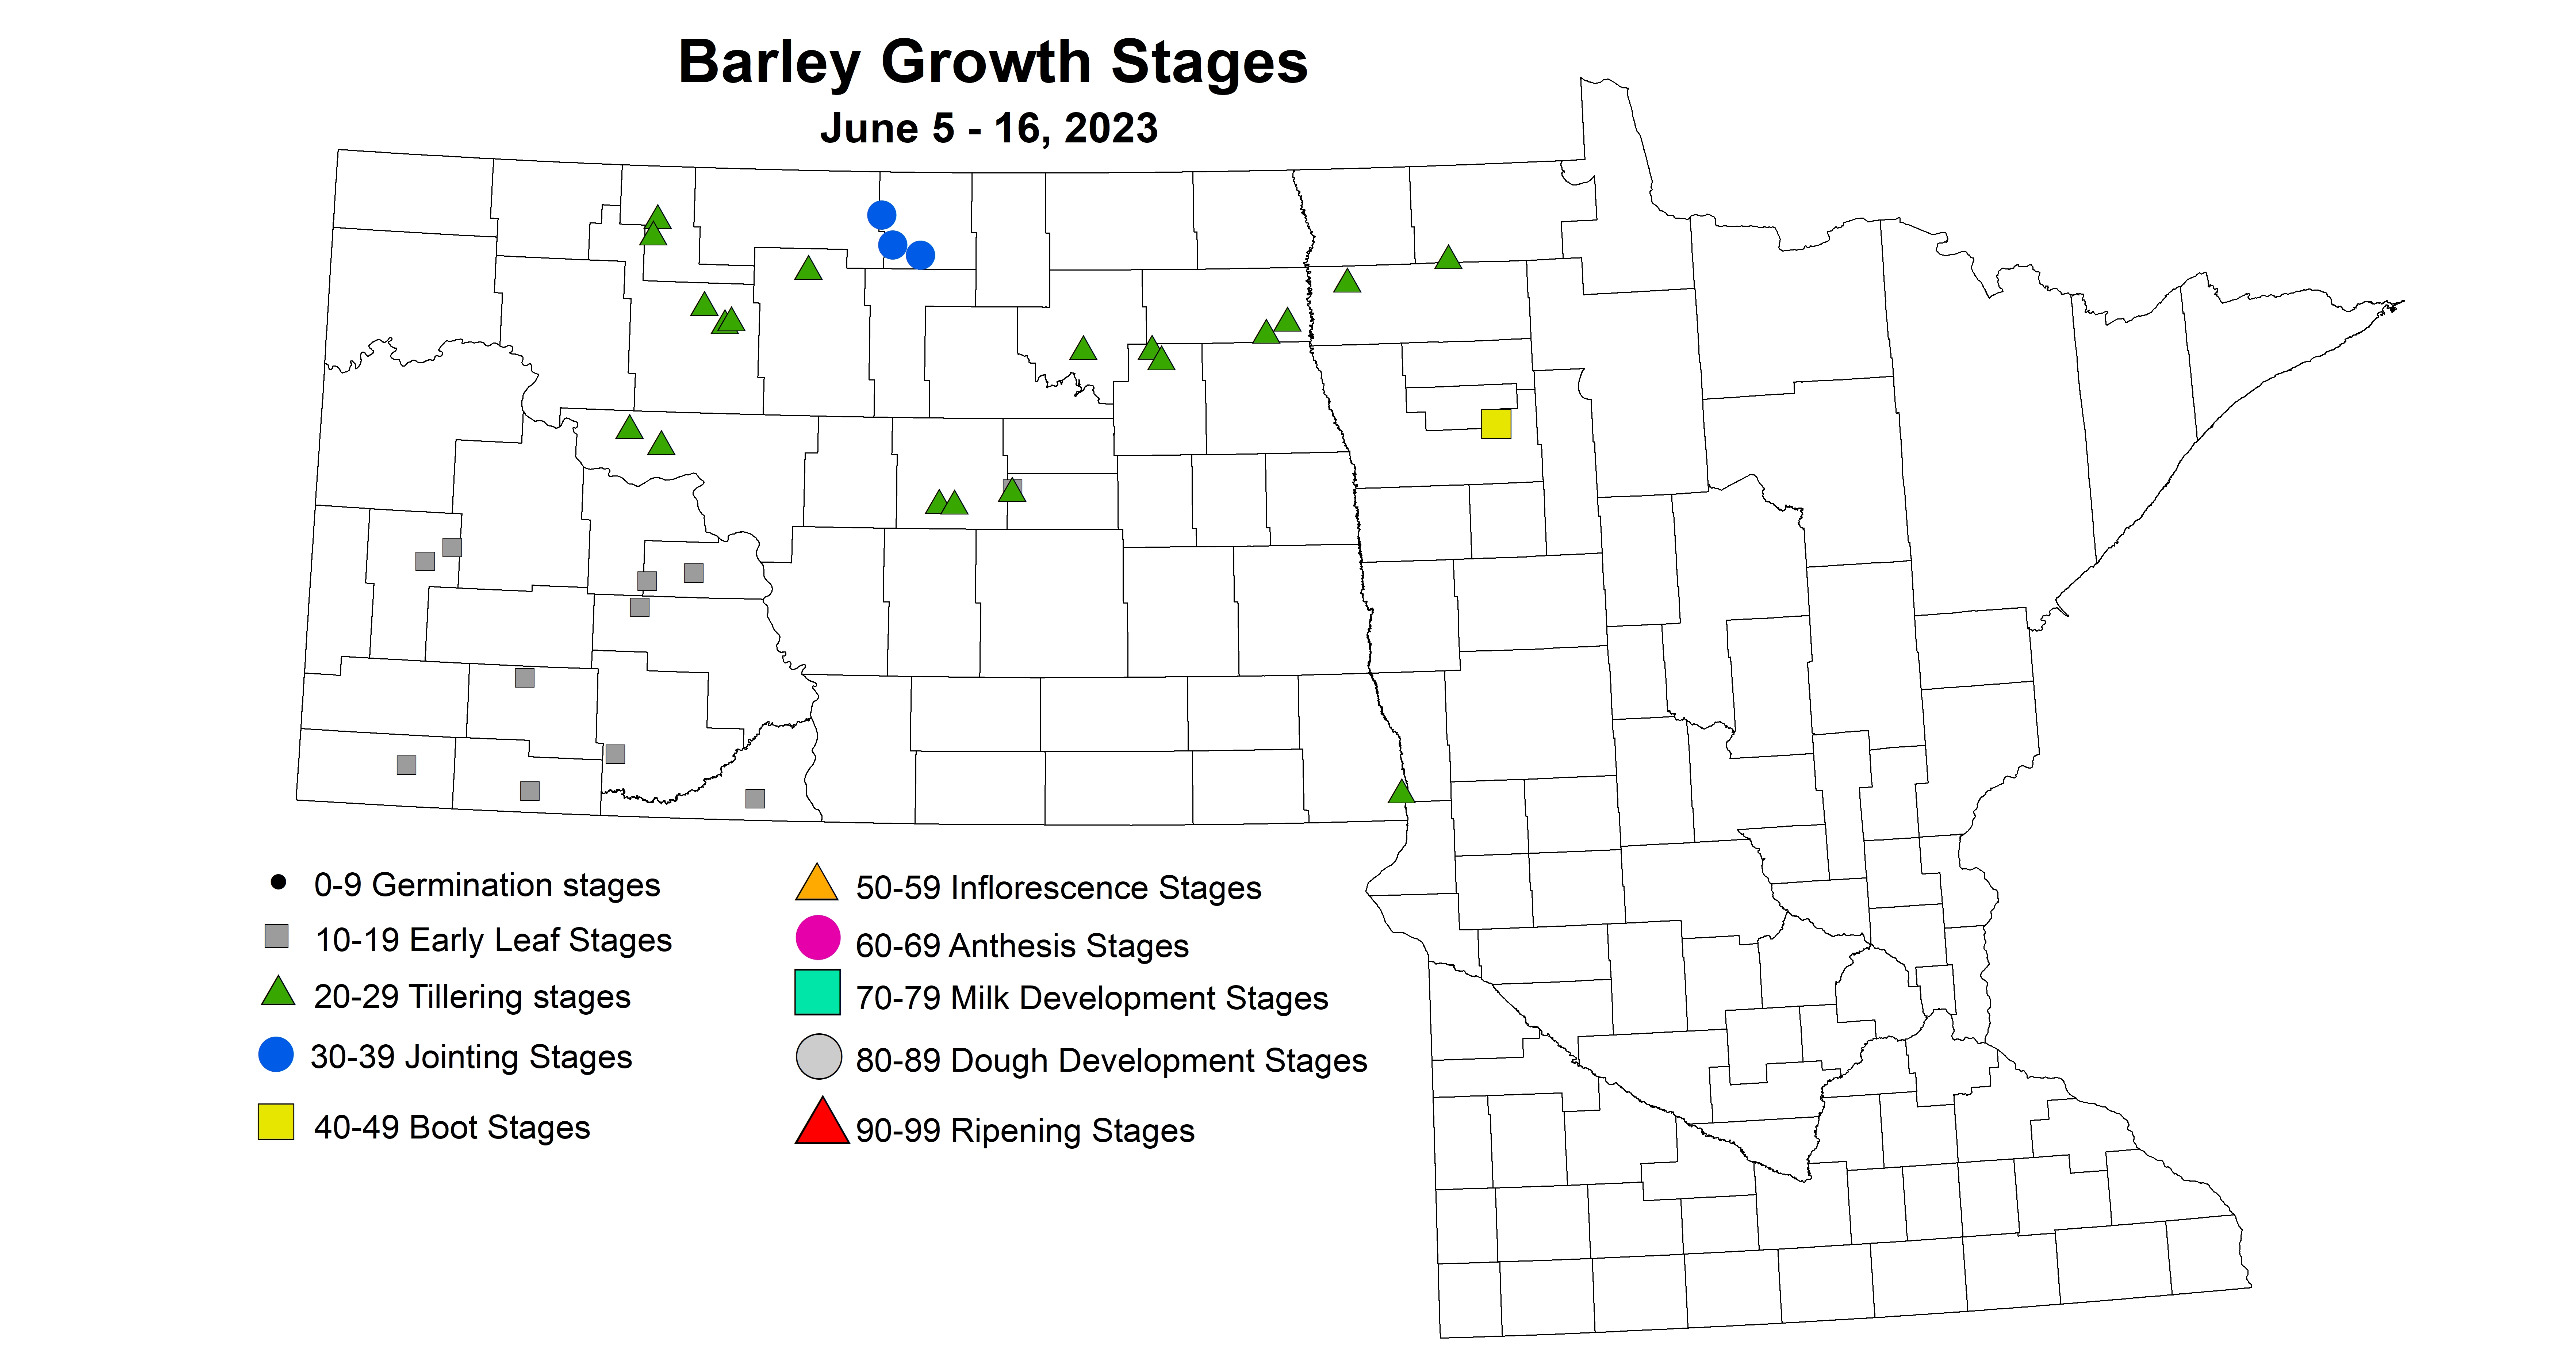 barley growth stages June 5-16 2023